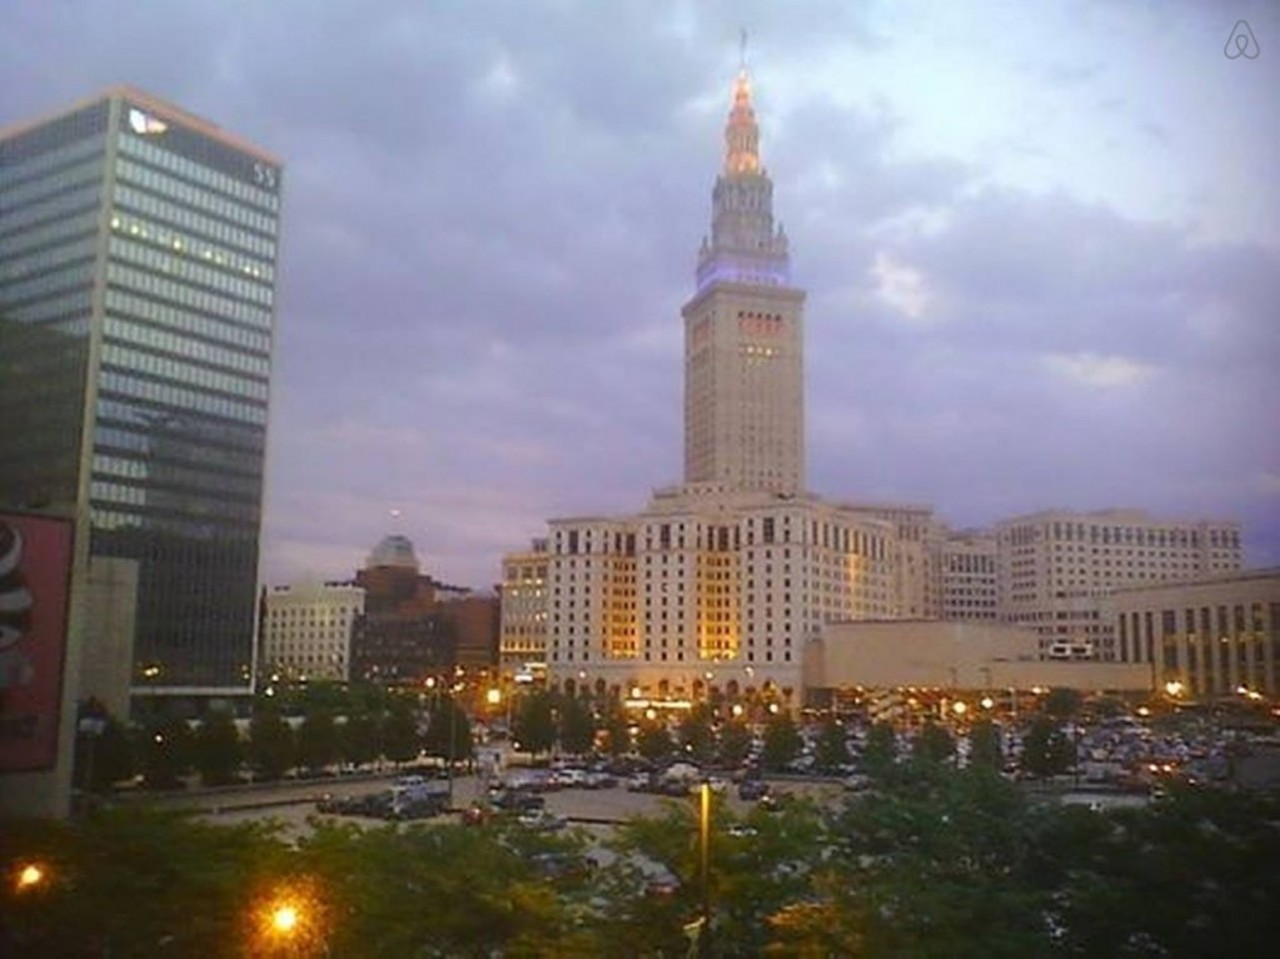 Best Cleveland view: Visitors could spend all their time on this visit sitting next to the window and staring at Tower City looming above, but with array of activities around them they won&#146;t want to. Located in the Warehouse District, this is truly one of the best views available in a Cleveland Airbnb. The condo&#146;s open floor plan is perfect for entertaining groups during your stay. Location is everything, and its location puts you only a stone&#146;s throw away from Public Square. This excellent view will cost you $120 a night. View on Airbnb.